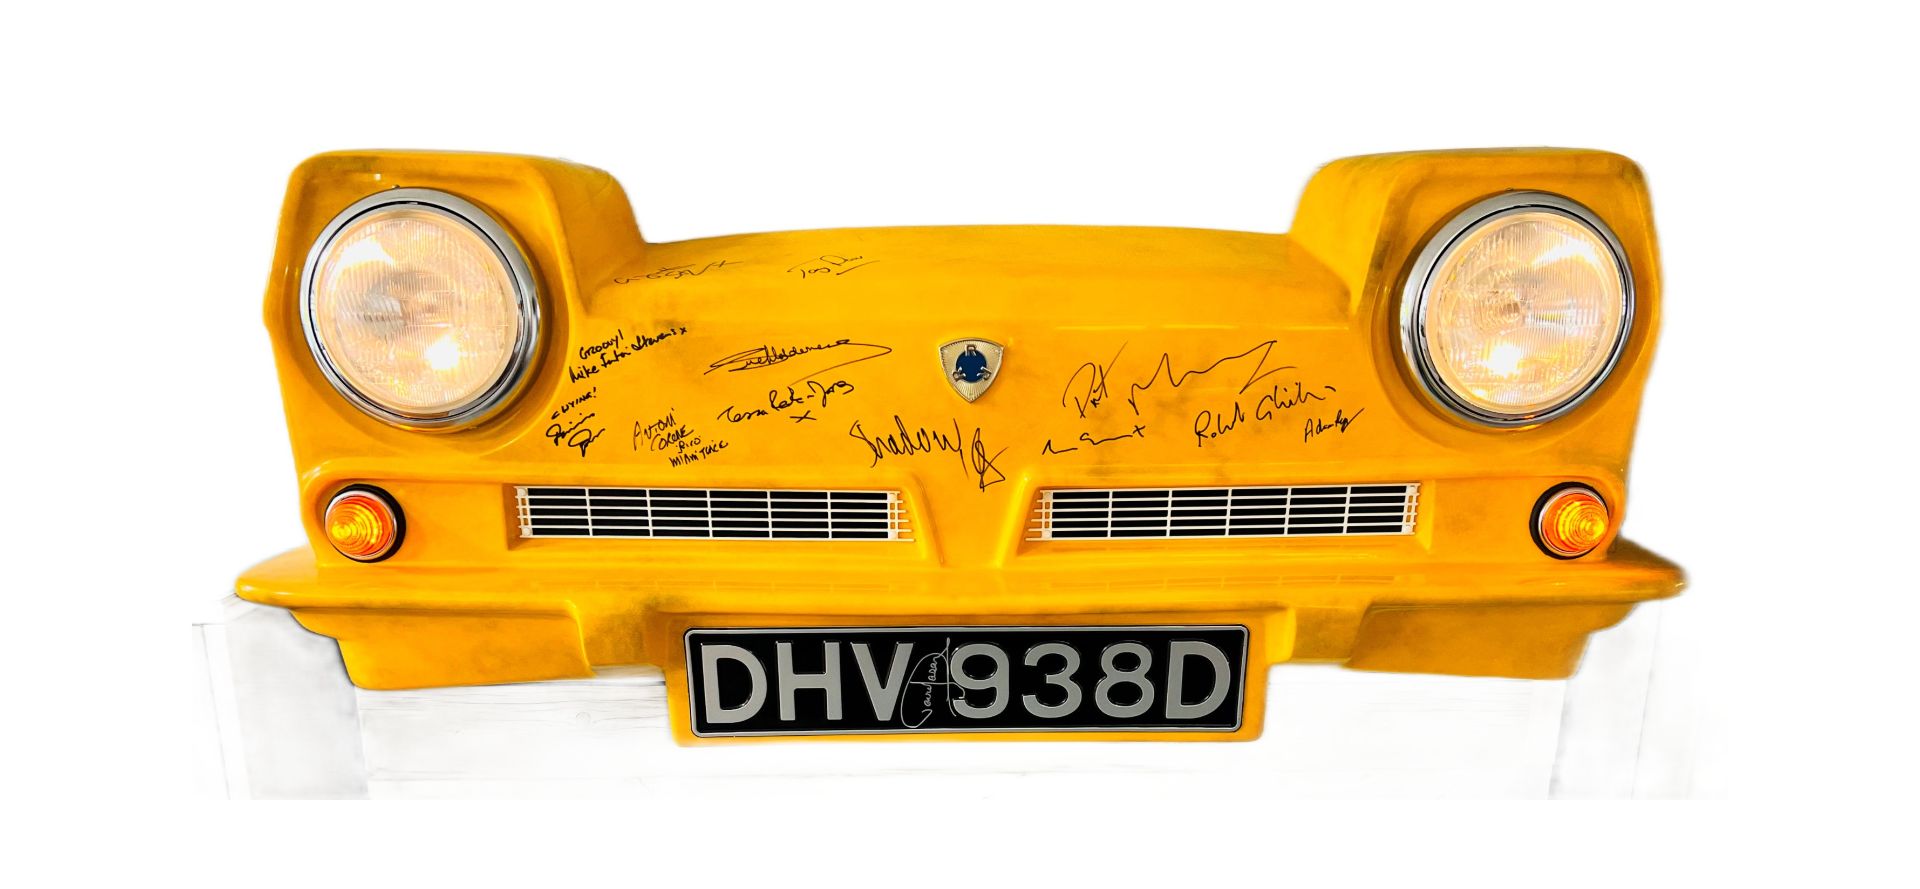 ONLY FOOLS & HORSES - TROTTER VAN FRONT END - SIGNED BY DAVID JASON + CAST